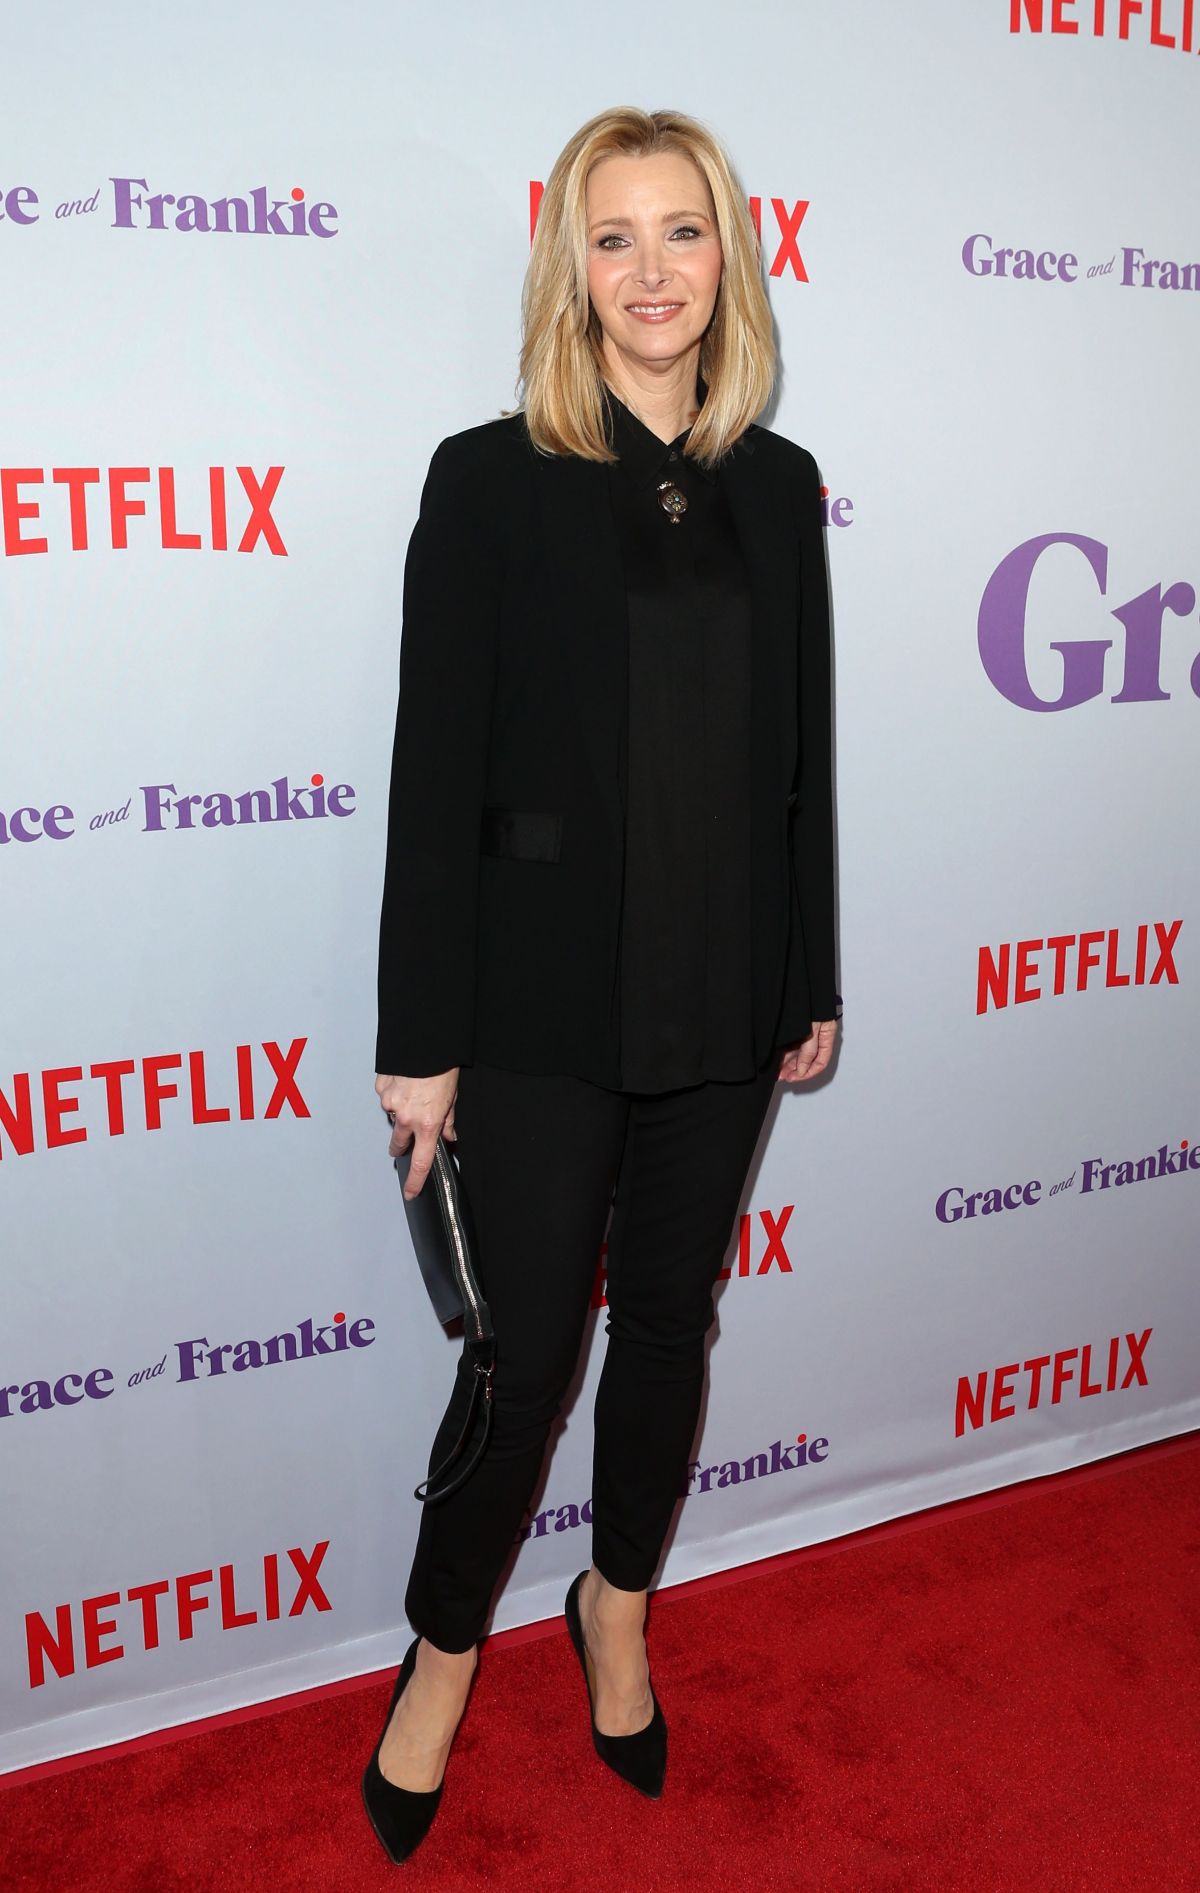 LISA KUDROW at Grace and Frankie Season 4 Premiere in Los Angeles 01/18 ...